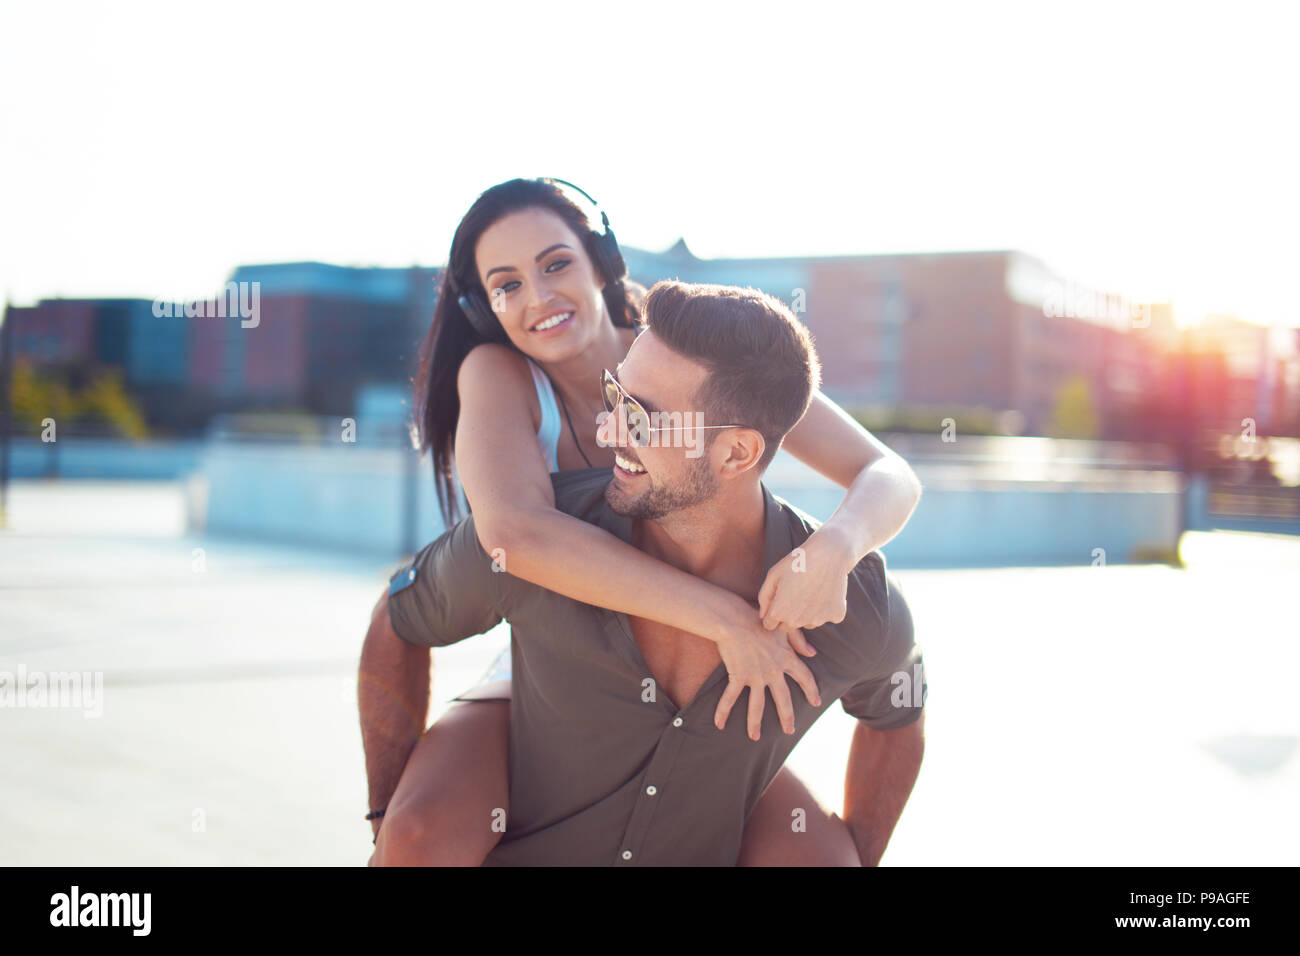 Happy young trendy urban couple have fun in city, riding piggyback Stock Photo